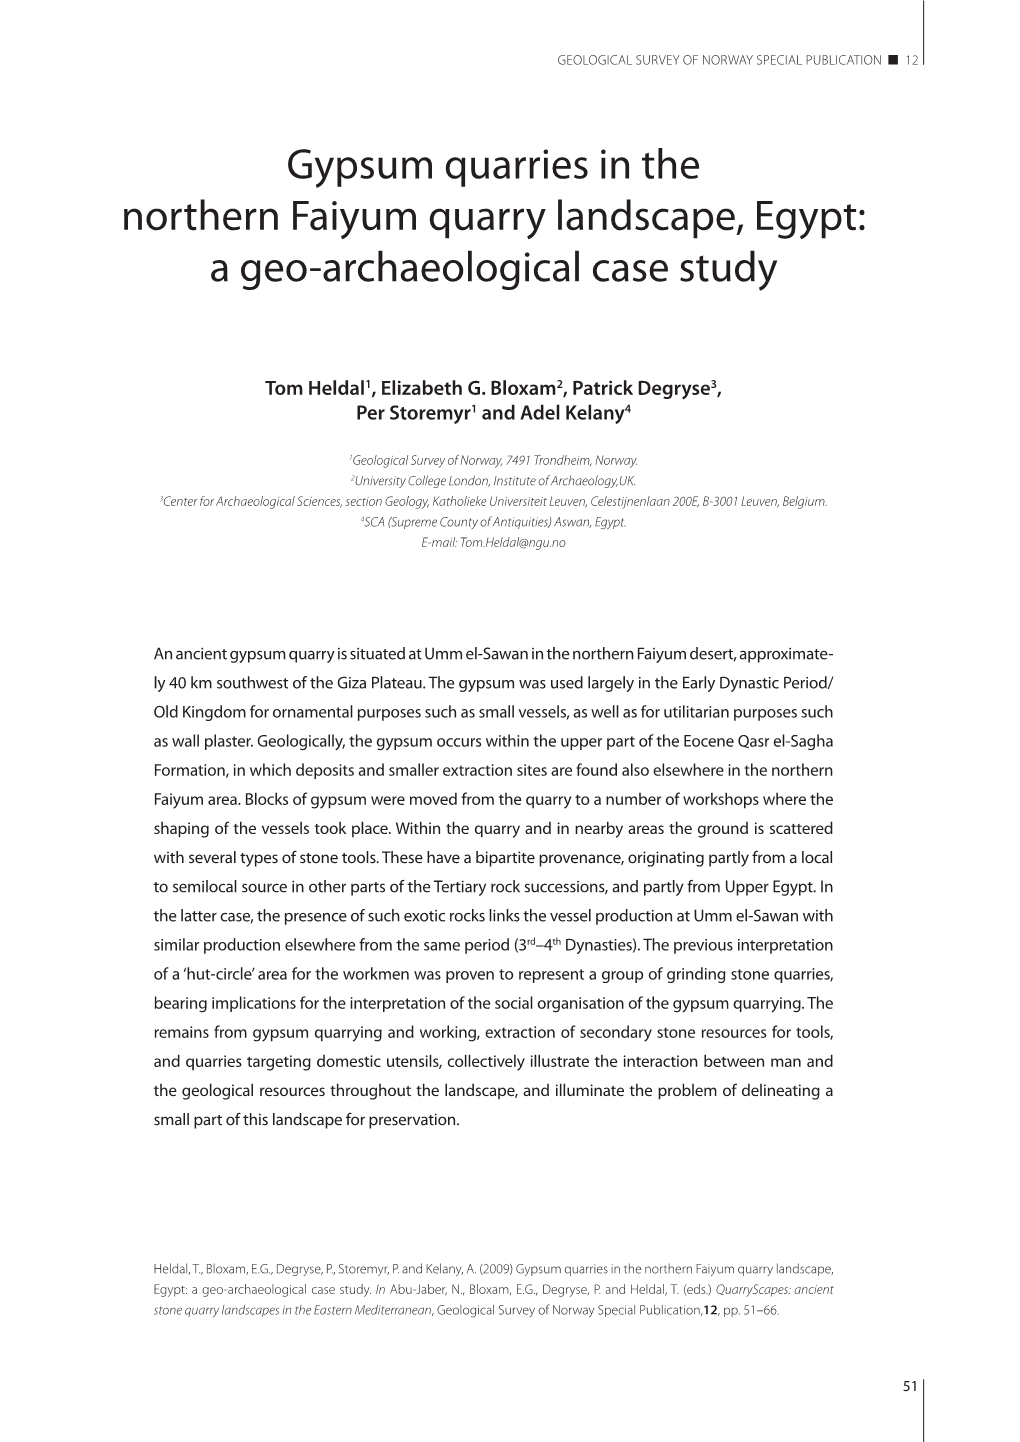 Gypsum Quarries in the Northern Faiyum Quarry Landscape, Egypt: a Geo-Archaeological Case Study